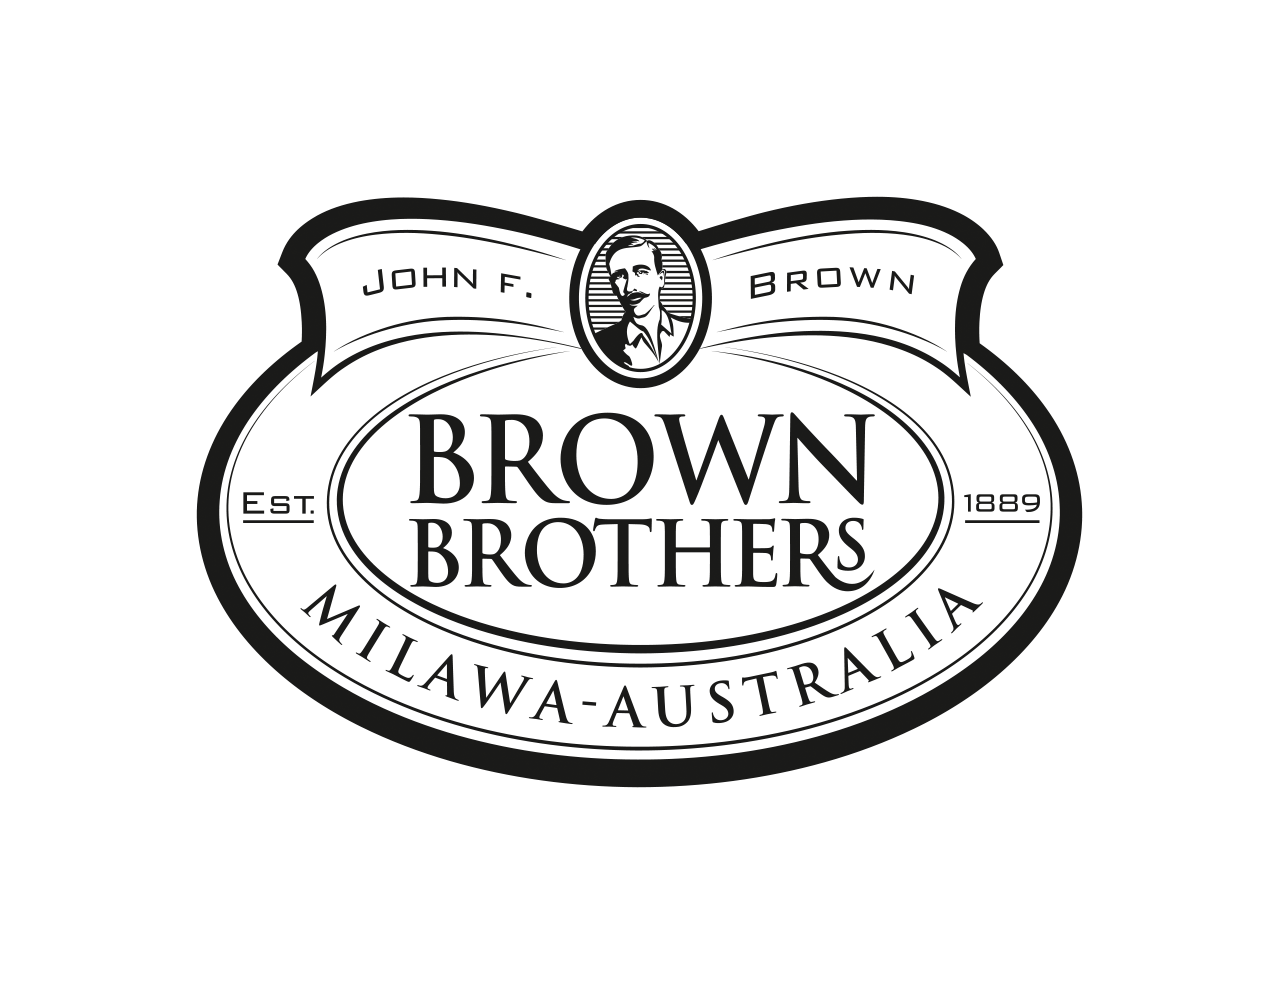 Brown Brothers - 20 hectares